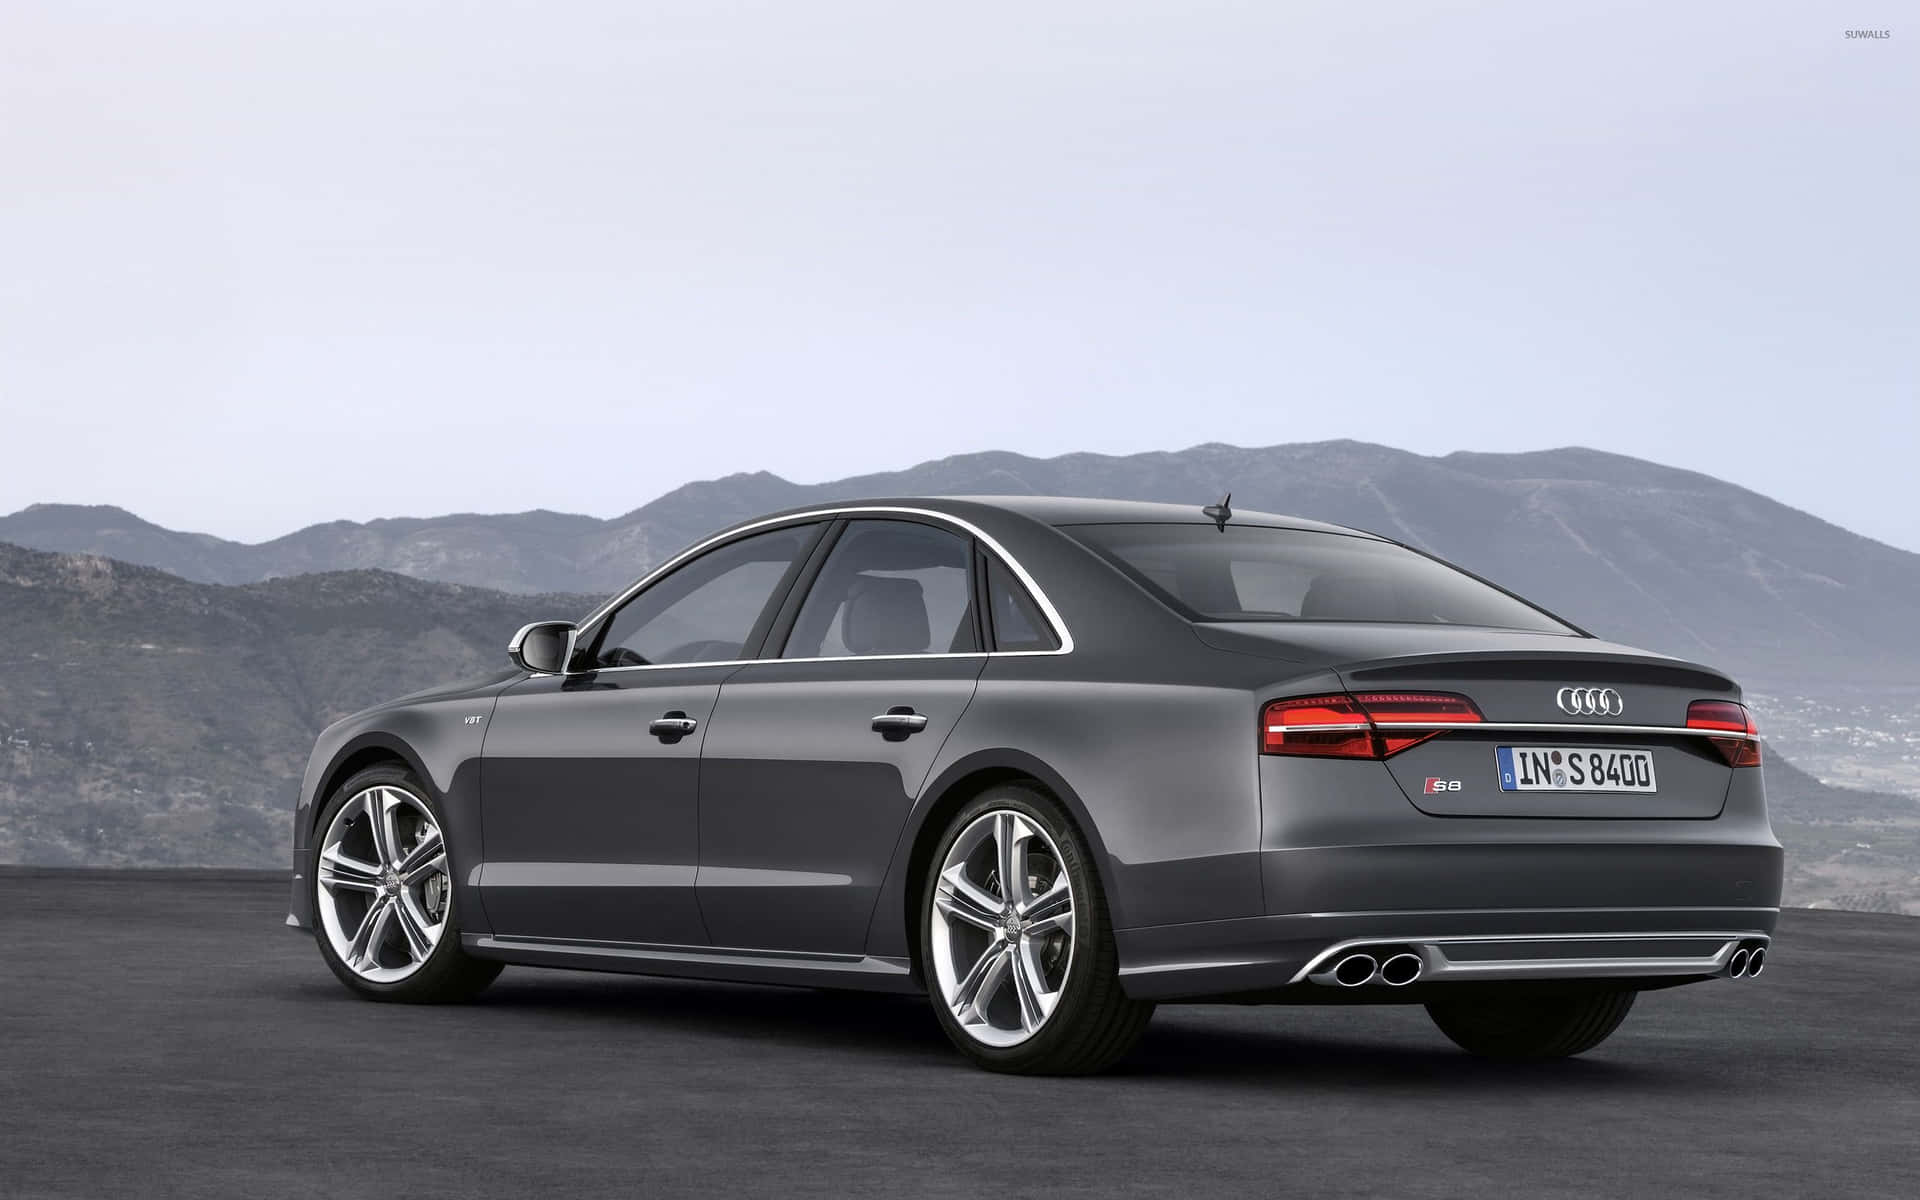 Captivating Audi S8 in Motion Wallpaper